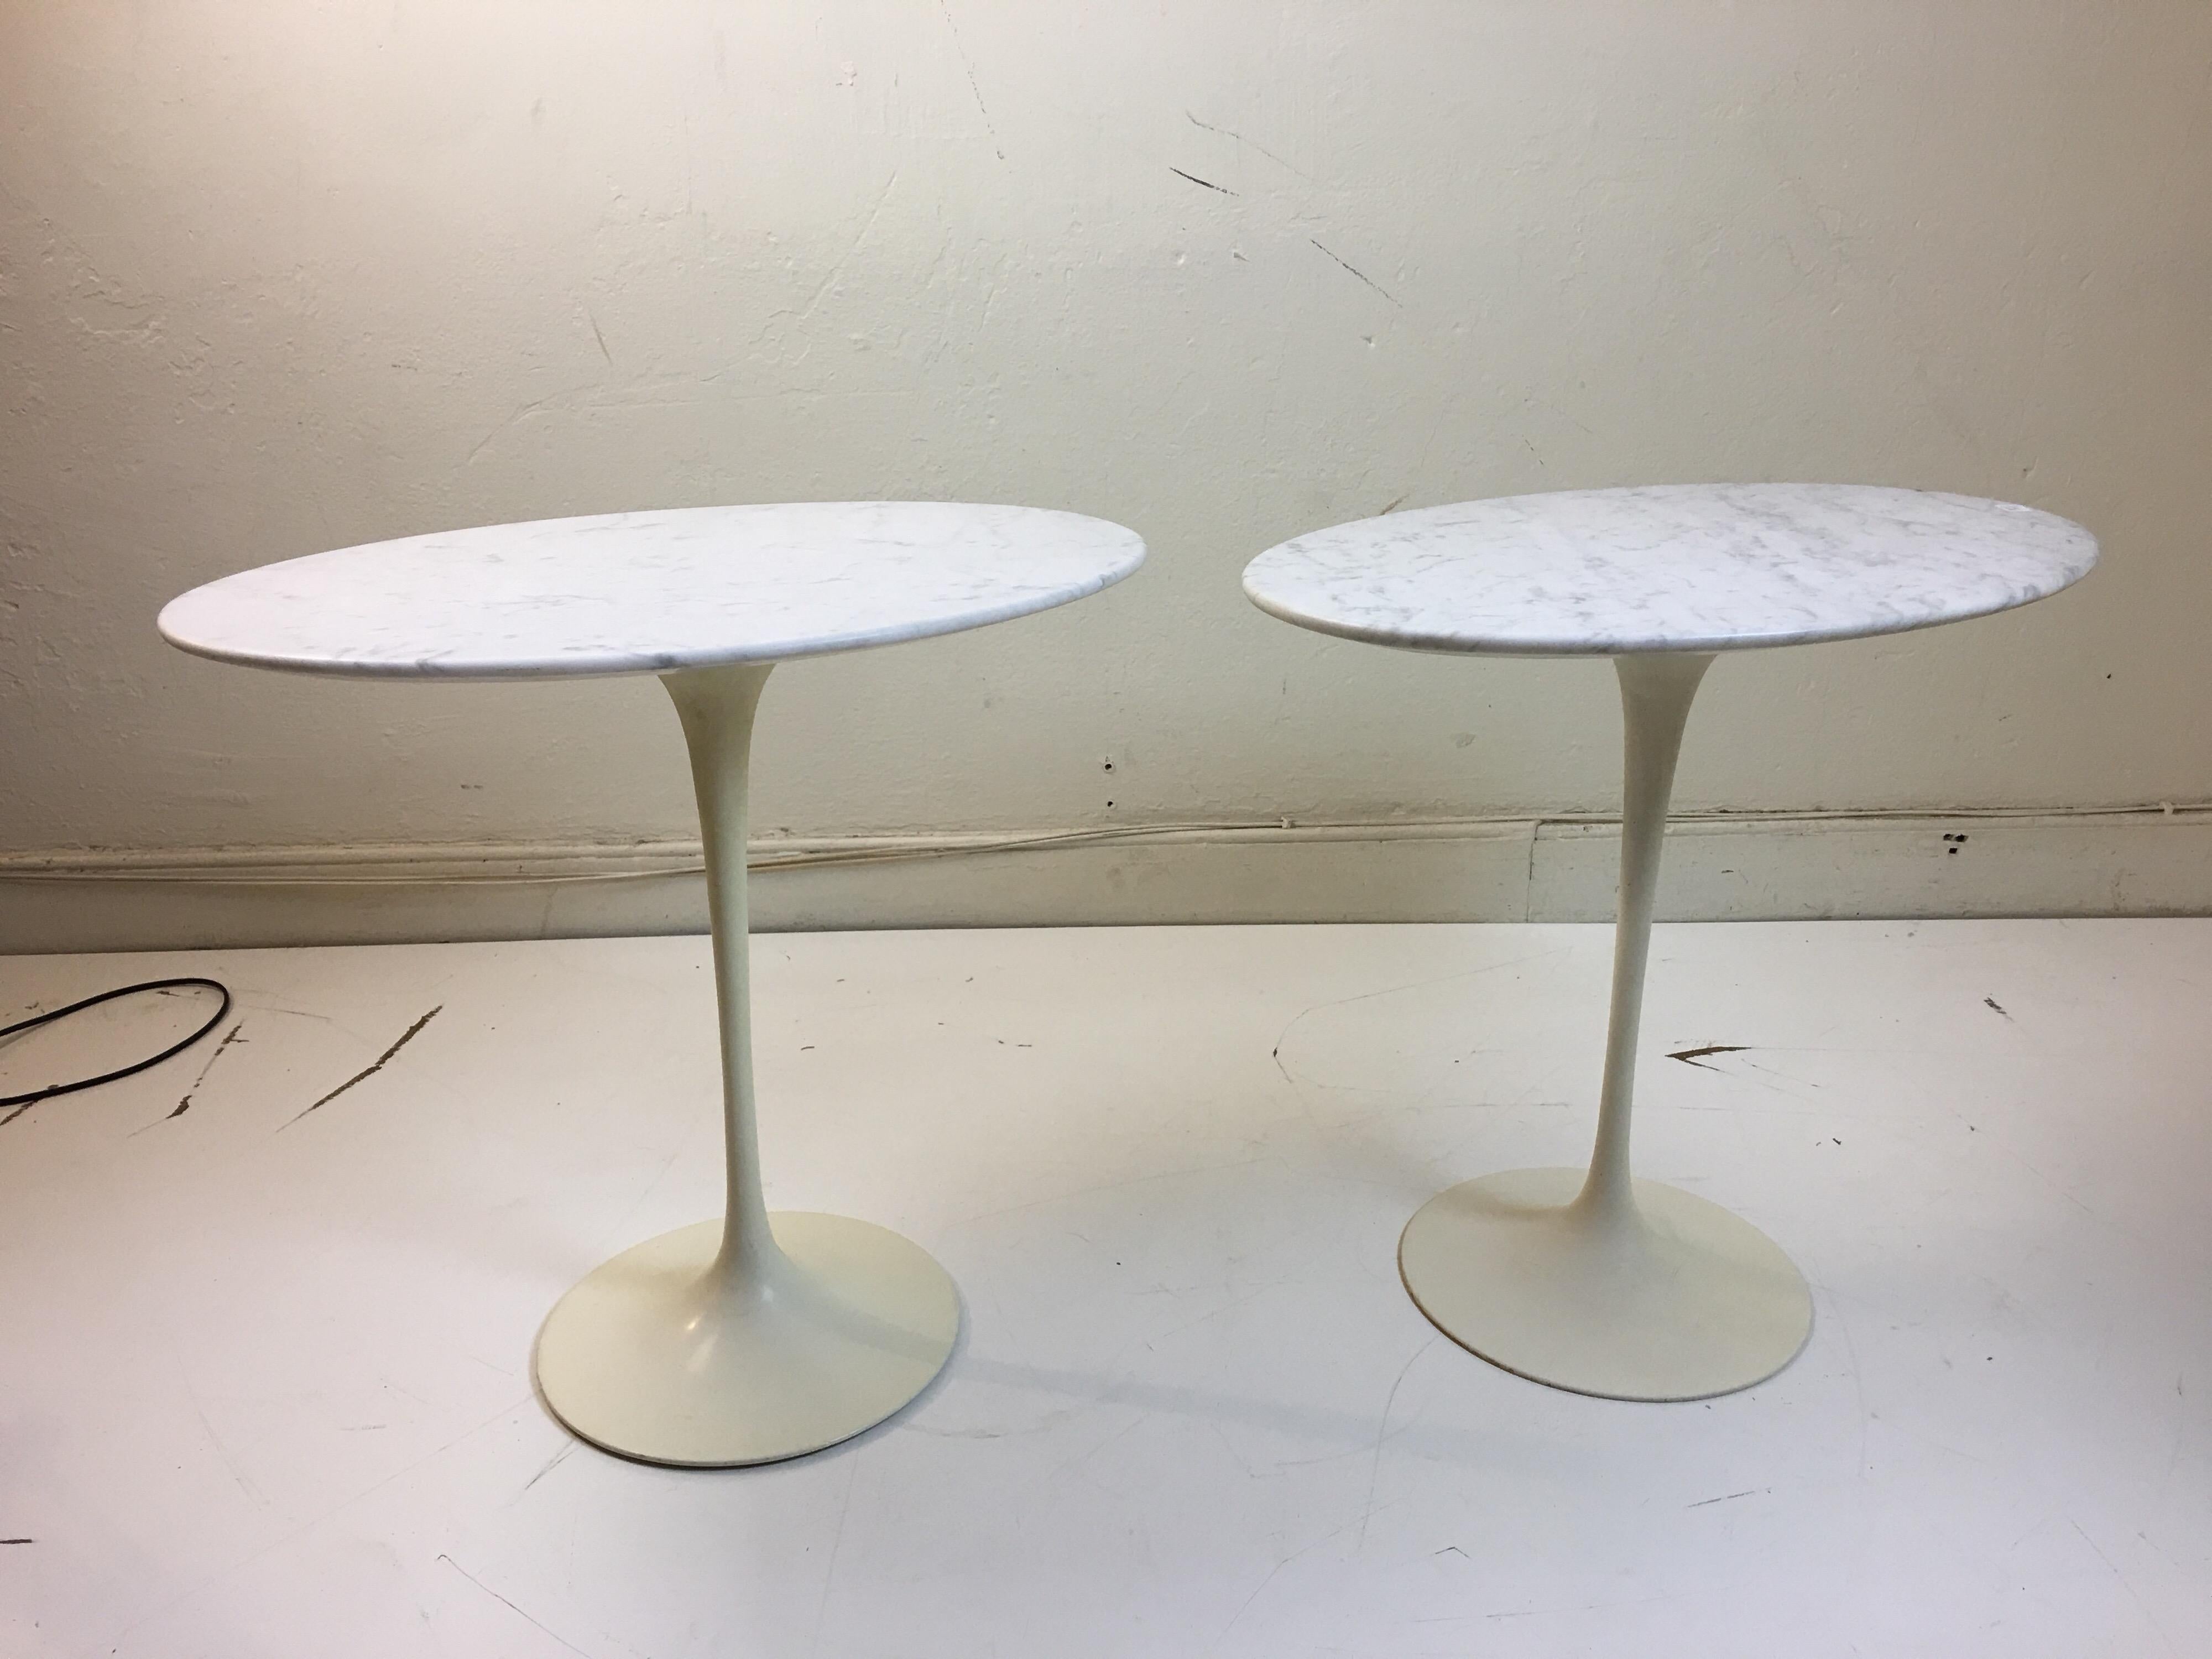 Eero Saarinen for Knoll marble oval side tables on cast iron bases. Bases form this early period are thinner than newer editions. Bought from original owner.